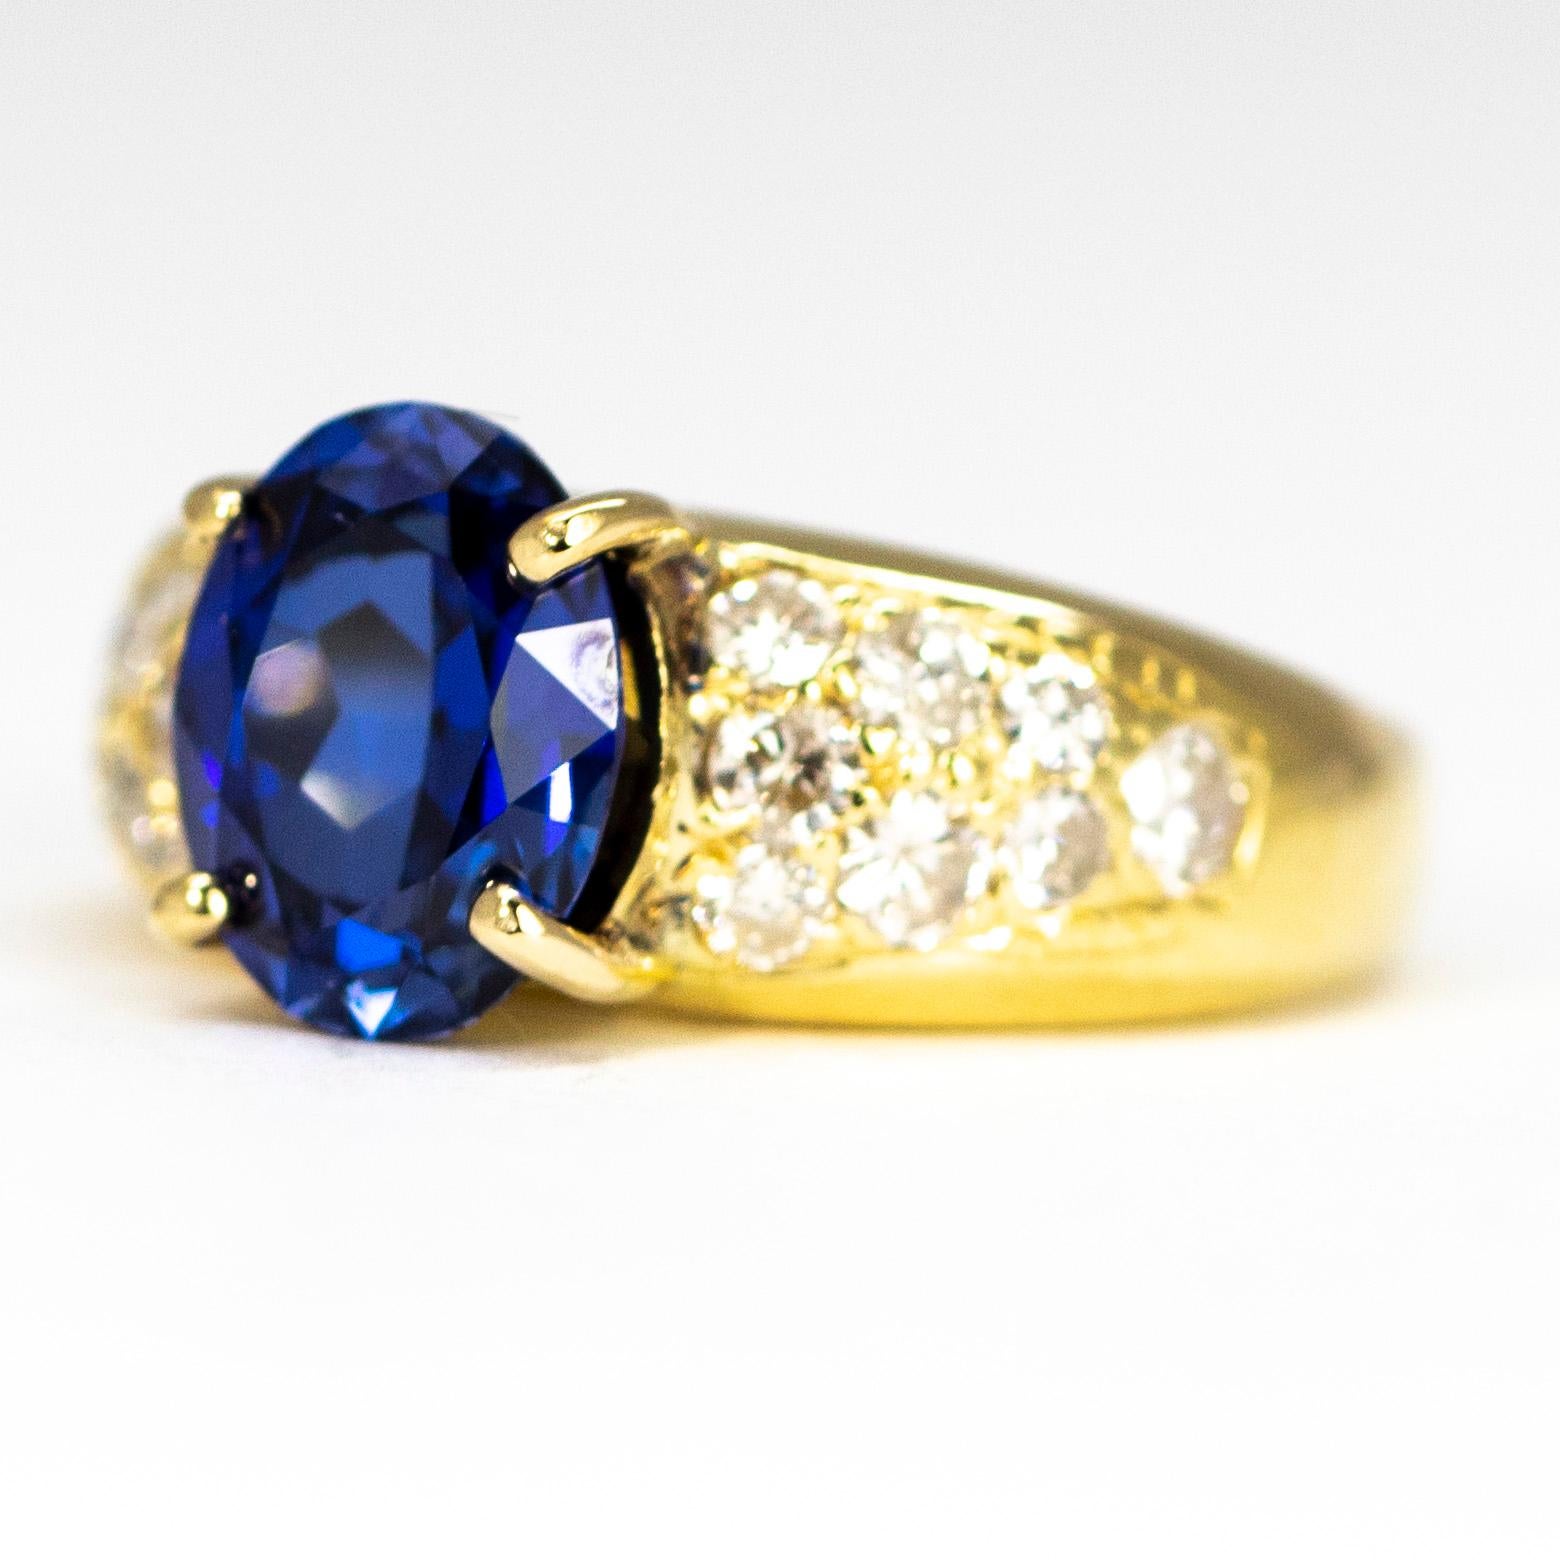 The stunning central sapphire in this ring measures 1.5carat and is the most wonderful deep blue. The shoulders of this chunky style ring are encrusted with diamonds which measure 7pts each. 

Ring Size: I 1/2 or 4 1/2 
Widest Point: 9mm

Weight: